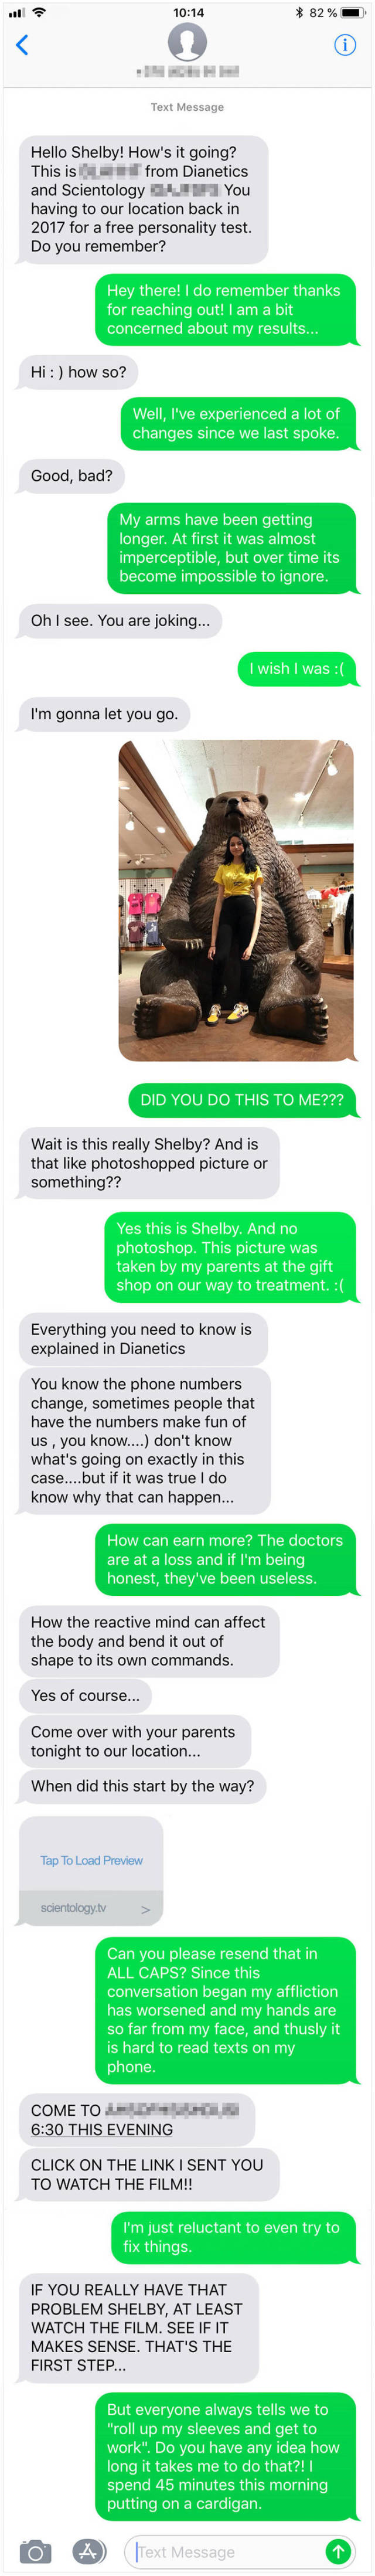 Scientologists Should Especially Fear Sending Wrong Number Texts